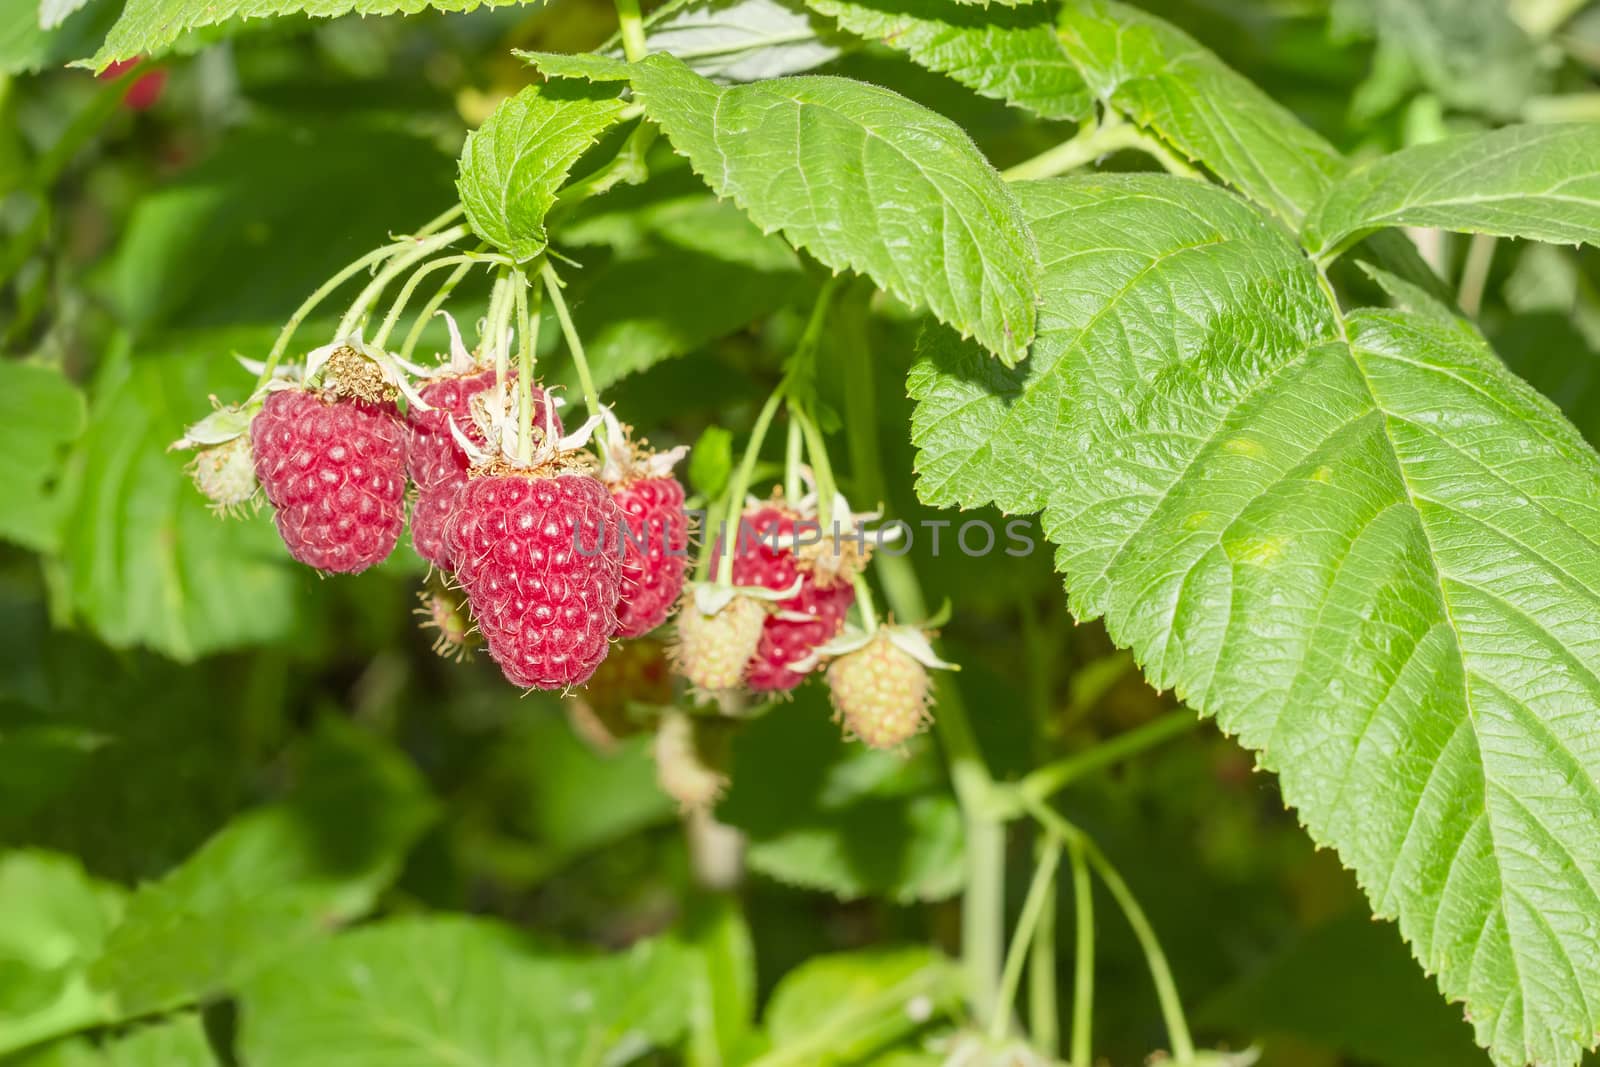 Branch of the raspberries with several ripe and immature berries among the green leaves in a raspberry canes
